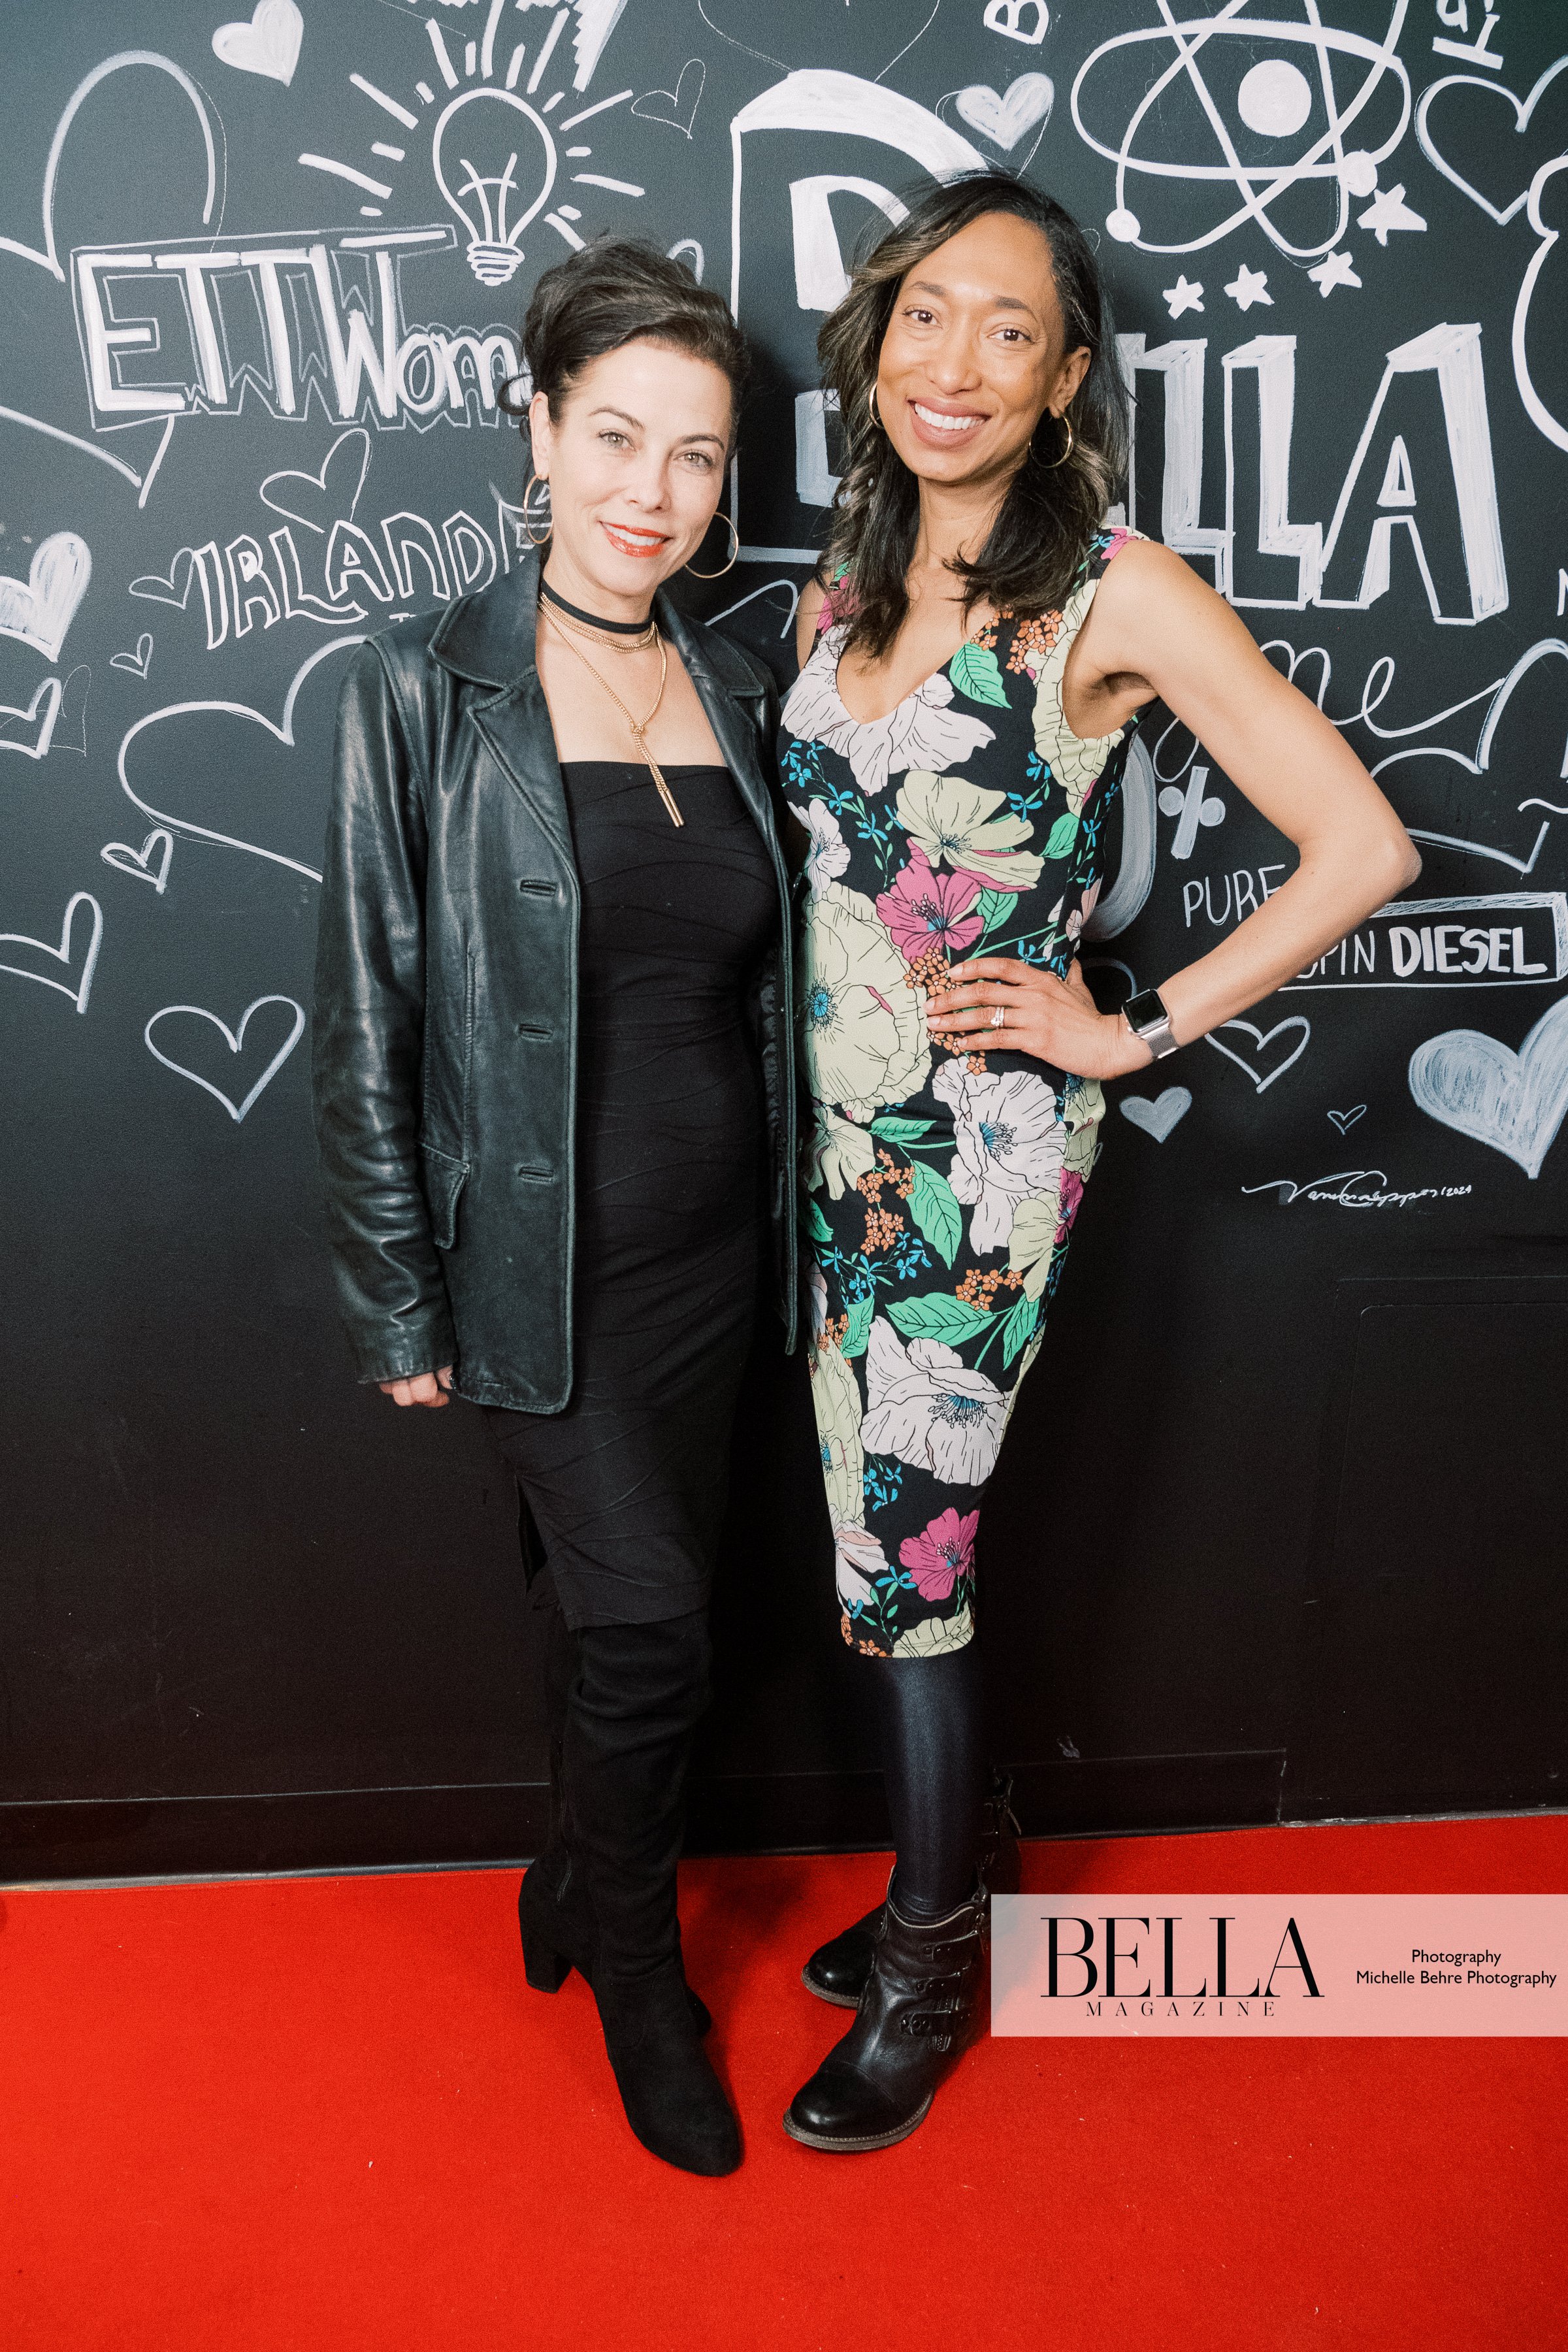 Michelle-Behre-Creative-Co-BELLA-Magazine-Women-of-Influence-Cover-Party-Burgerology-113.jpg